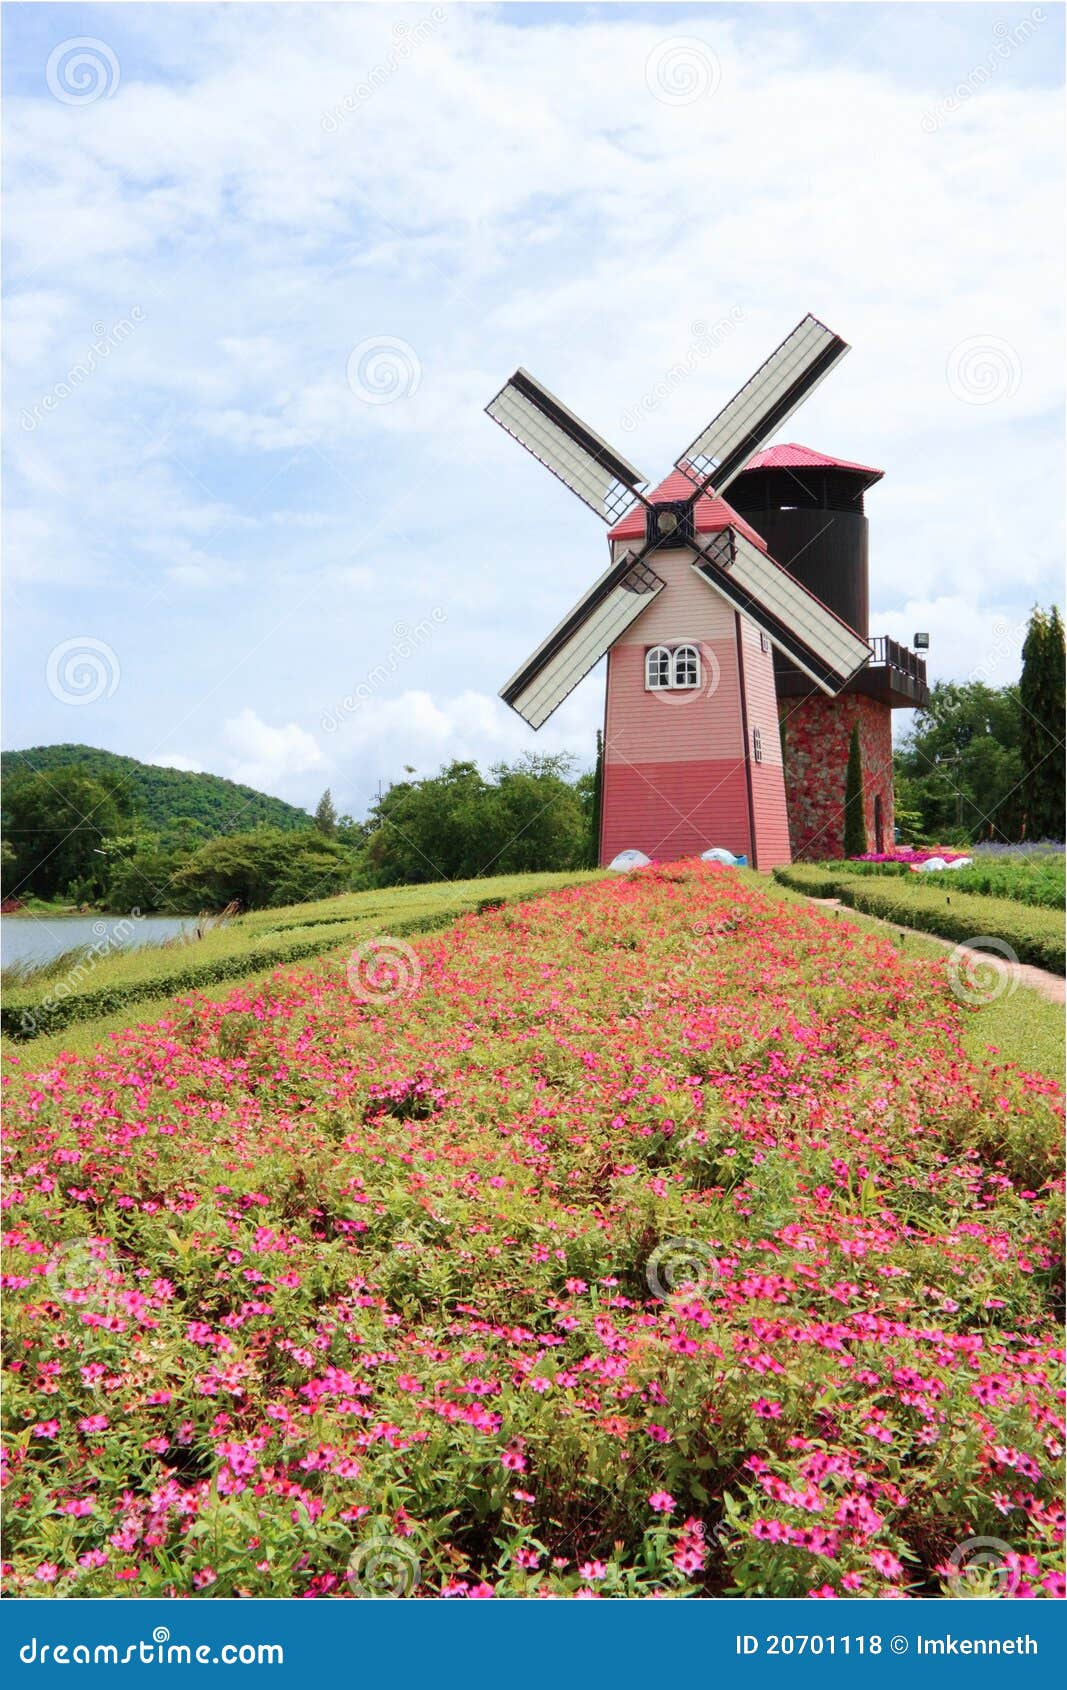 Flower Garden With Windmill Royalty Free Stock Photos - Image: 20701118